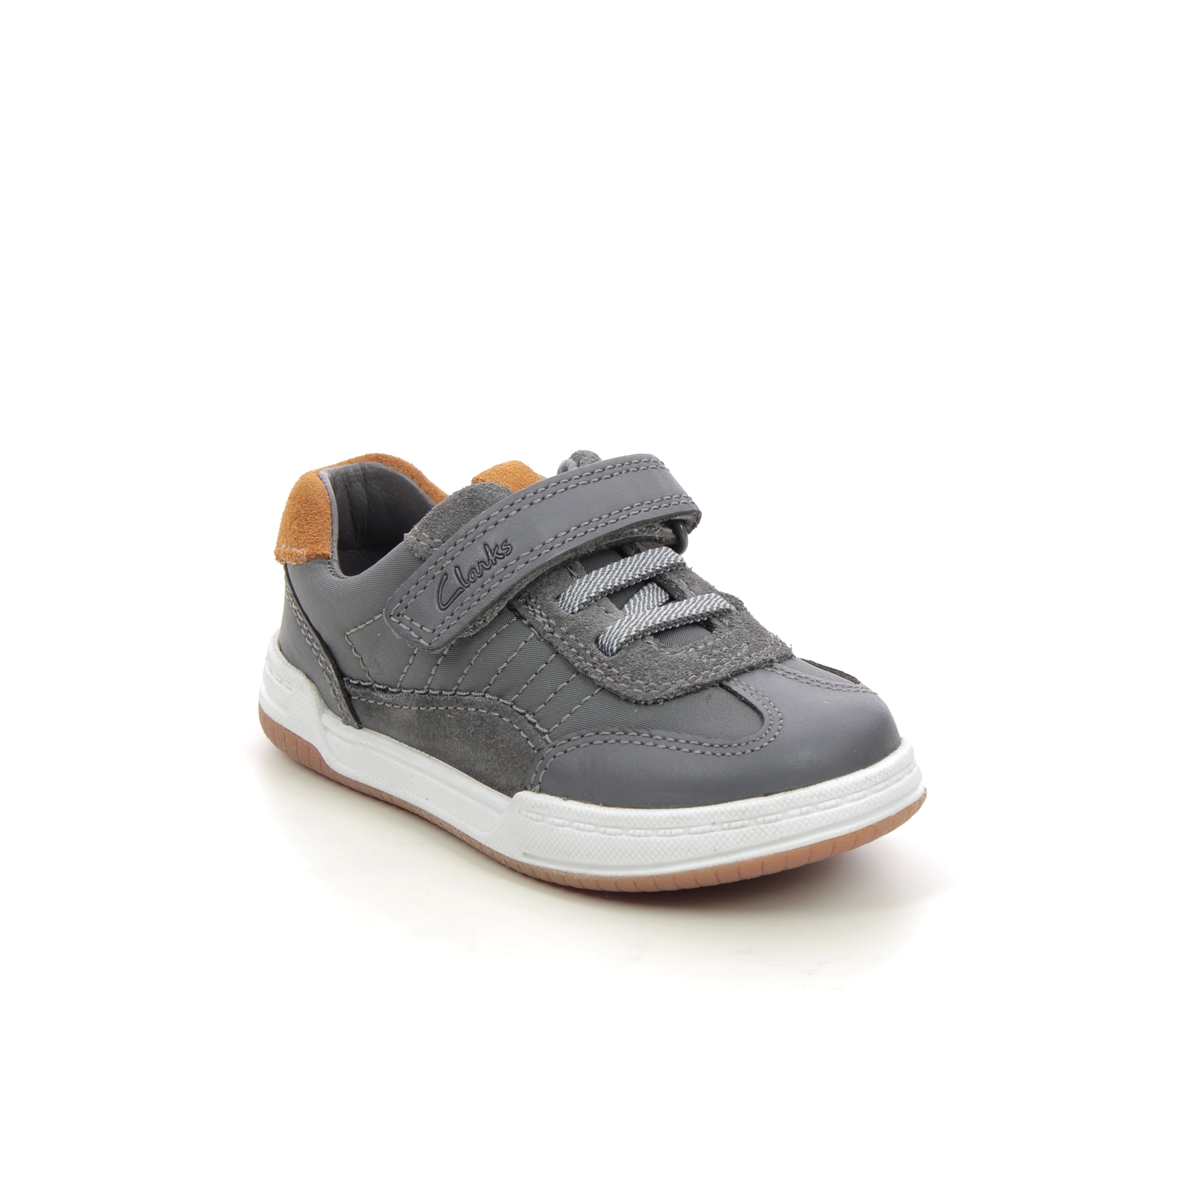 Clarks Fawn Family T Grey Leather Kids Boys Toddler Shoes 751286F In Size 5.5 In Plain Grey Leather F Width Fitting Regular Fit For kids